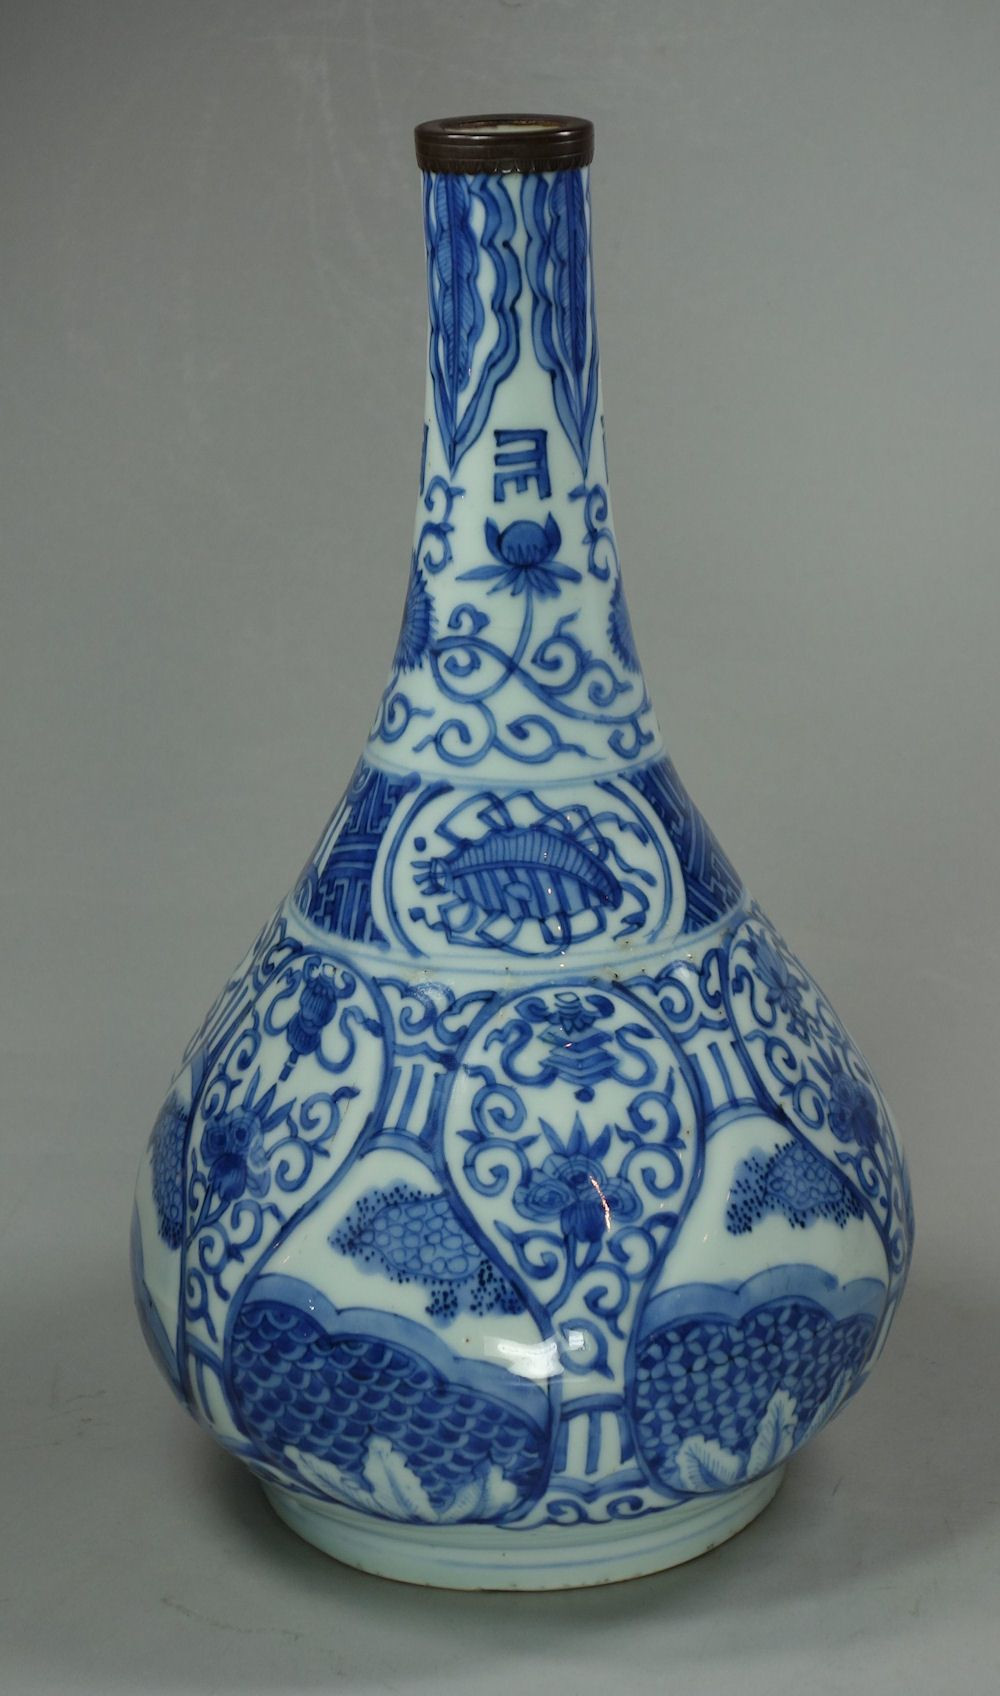 24 Trendy Blue and White Chinese Vases Cheap 2024 free download blue and white chinese vases cheap of chinese blue and white kraak bottle vase wanli 1573 1610 with a for chinese blue and white kraak bottle vase wanli 1573 1610 with a moulded body of styl